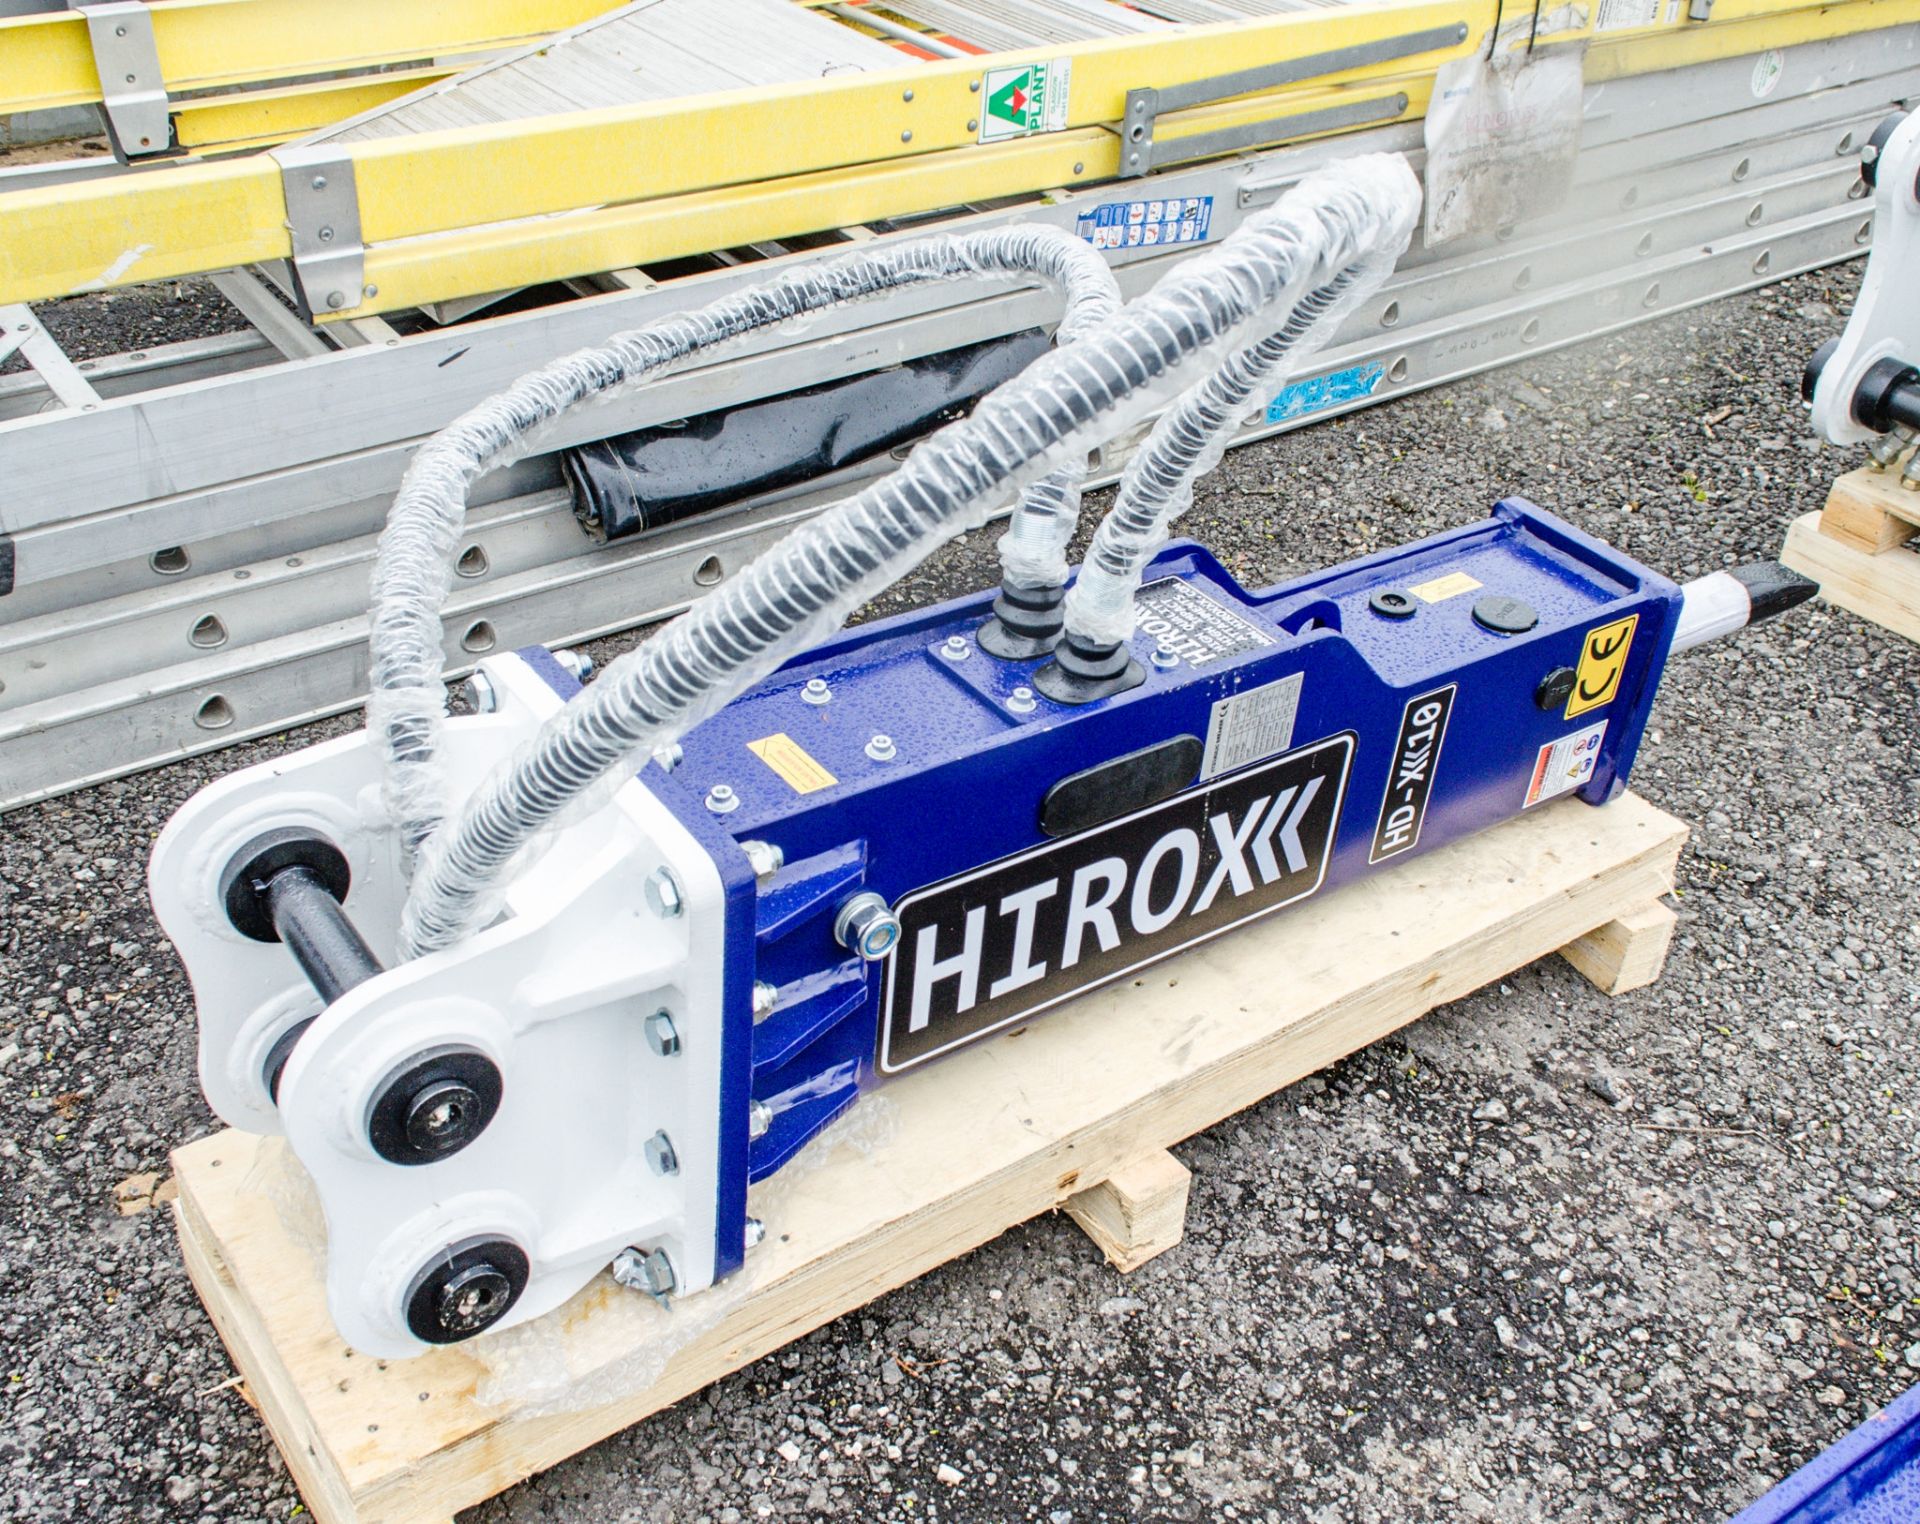 Hirox HDX-10 hydraulic breaker to suit 1.5 to 4 tonne machine Year: 2021 c/w tool kit ** New &